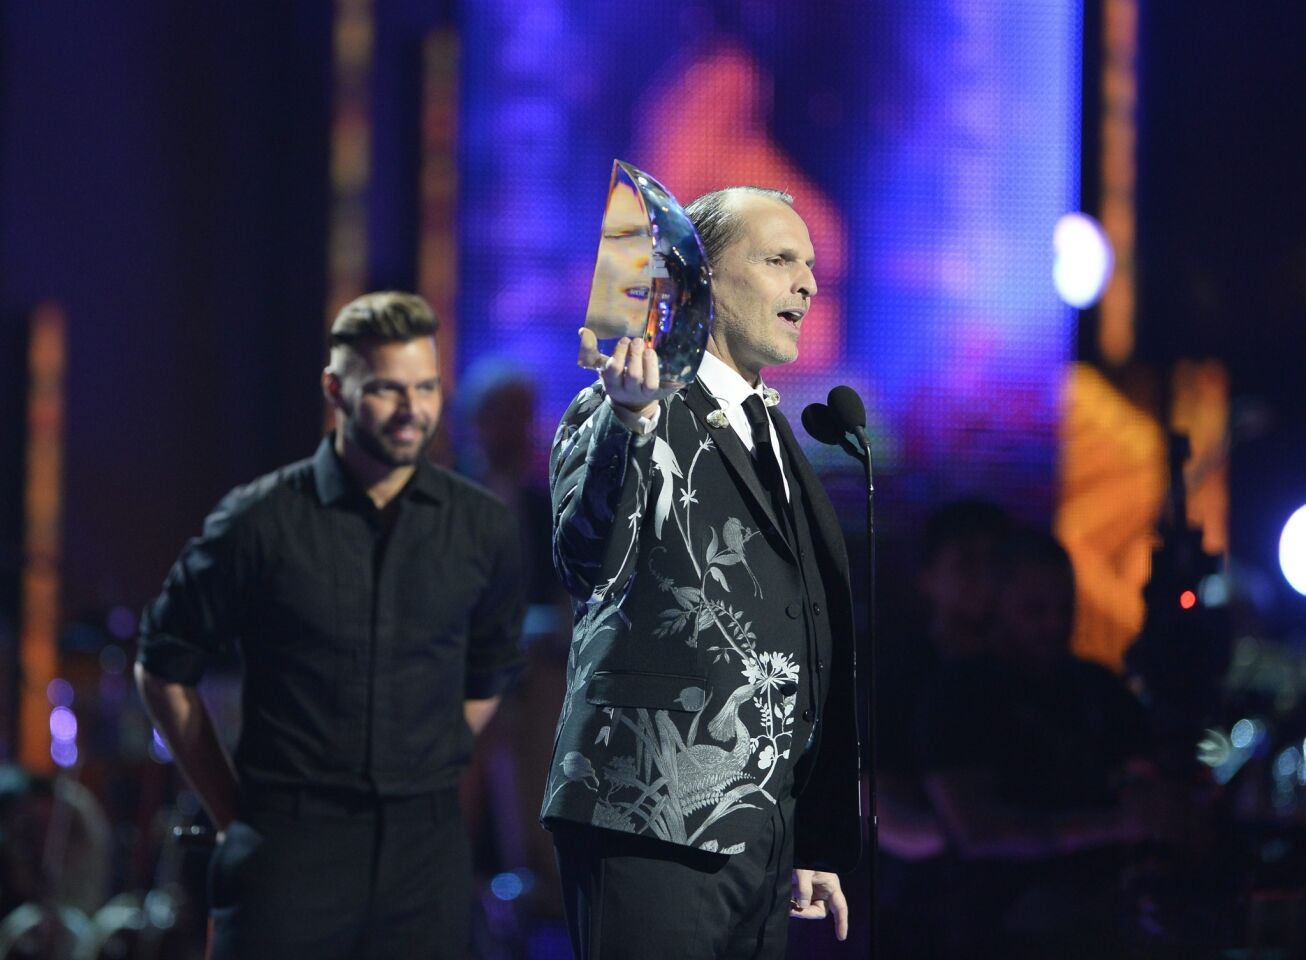 Italian-Spanish singer Miguel Bose, right, holds his 2013 Latin Recording Academy Person of the Year award presented by Puerto Rican singer Ricky Martin.